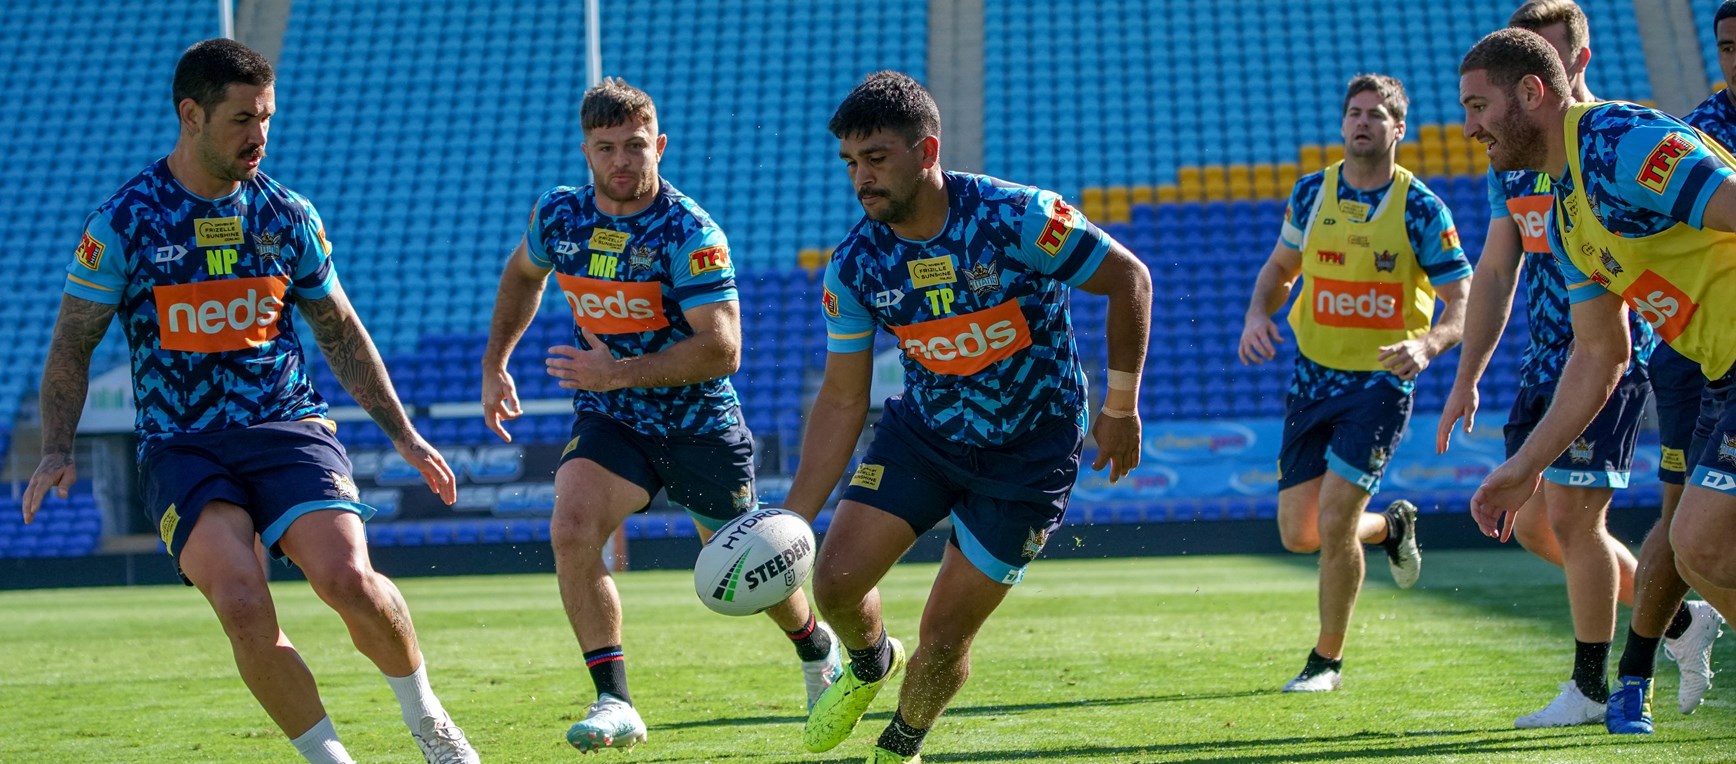 Final hit-out before Eels match